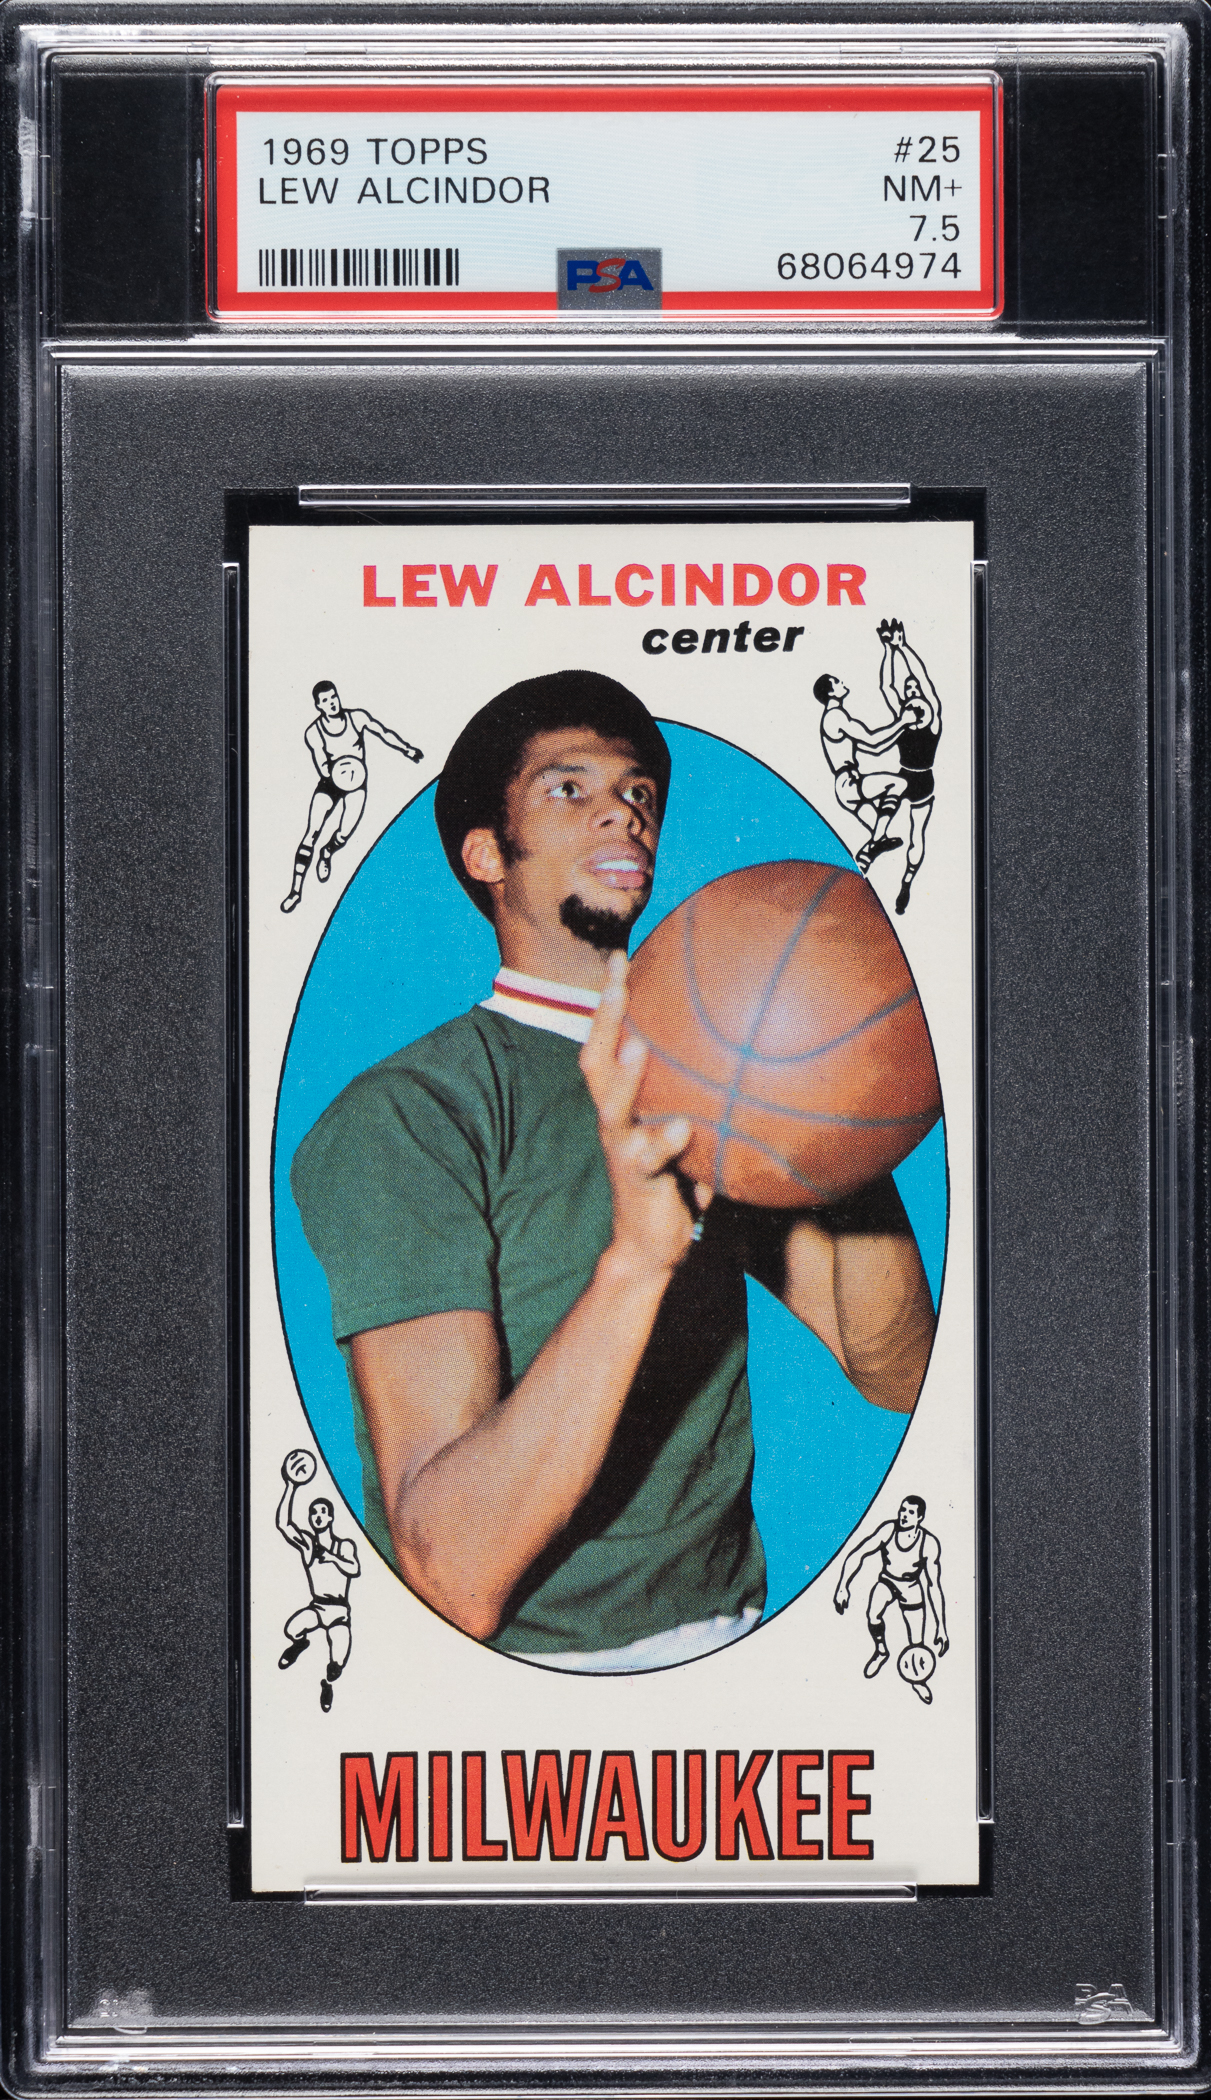 A 1969 Topps Basketball Lew Alcindor Rookie PSA 7.5 sold for $9,600